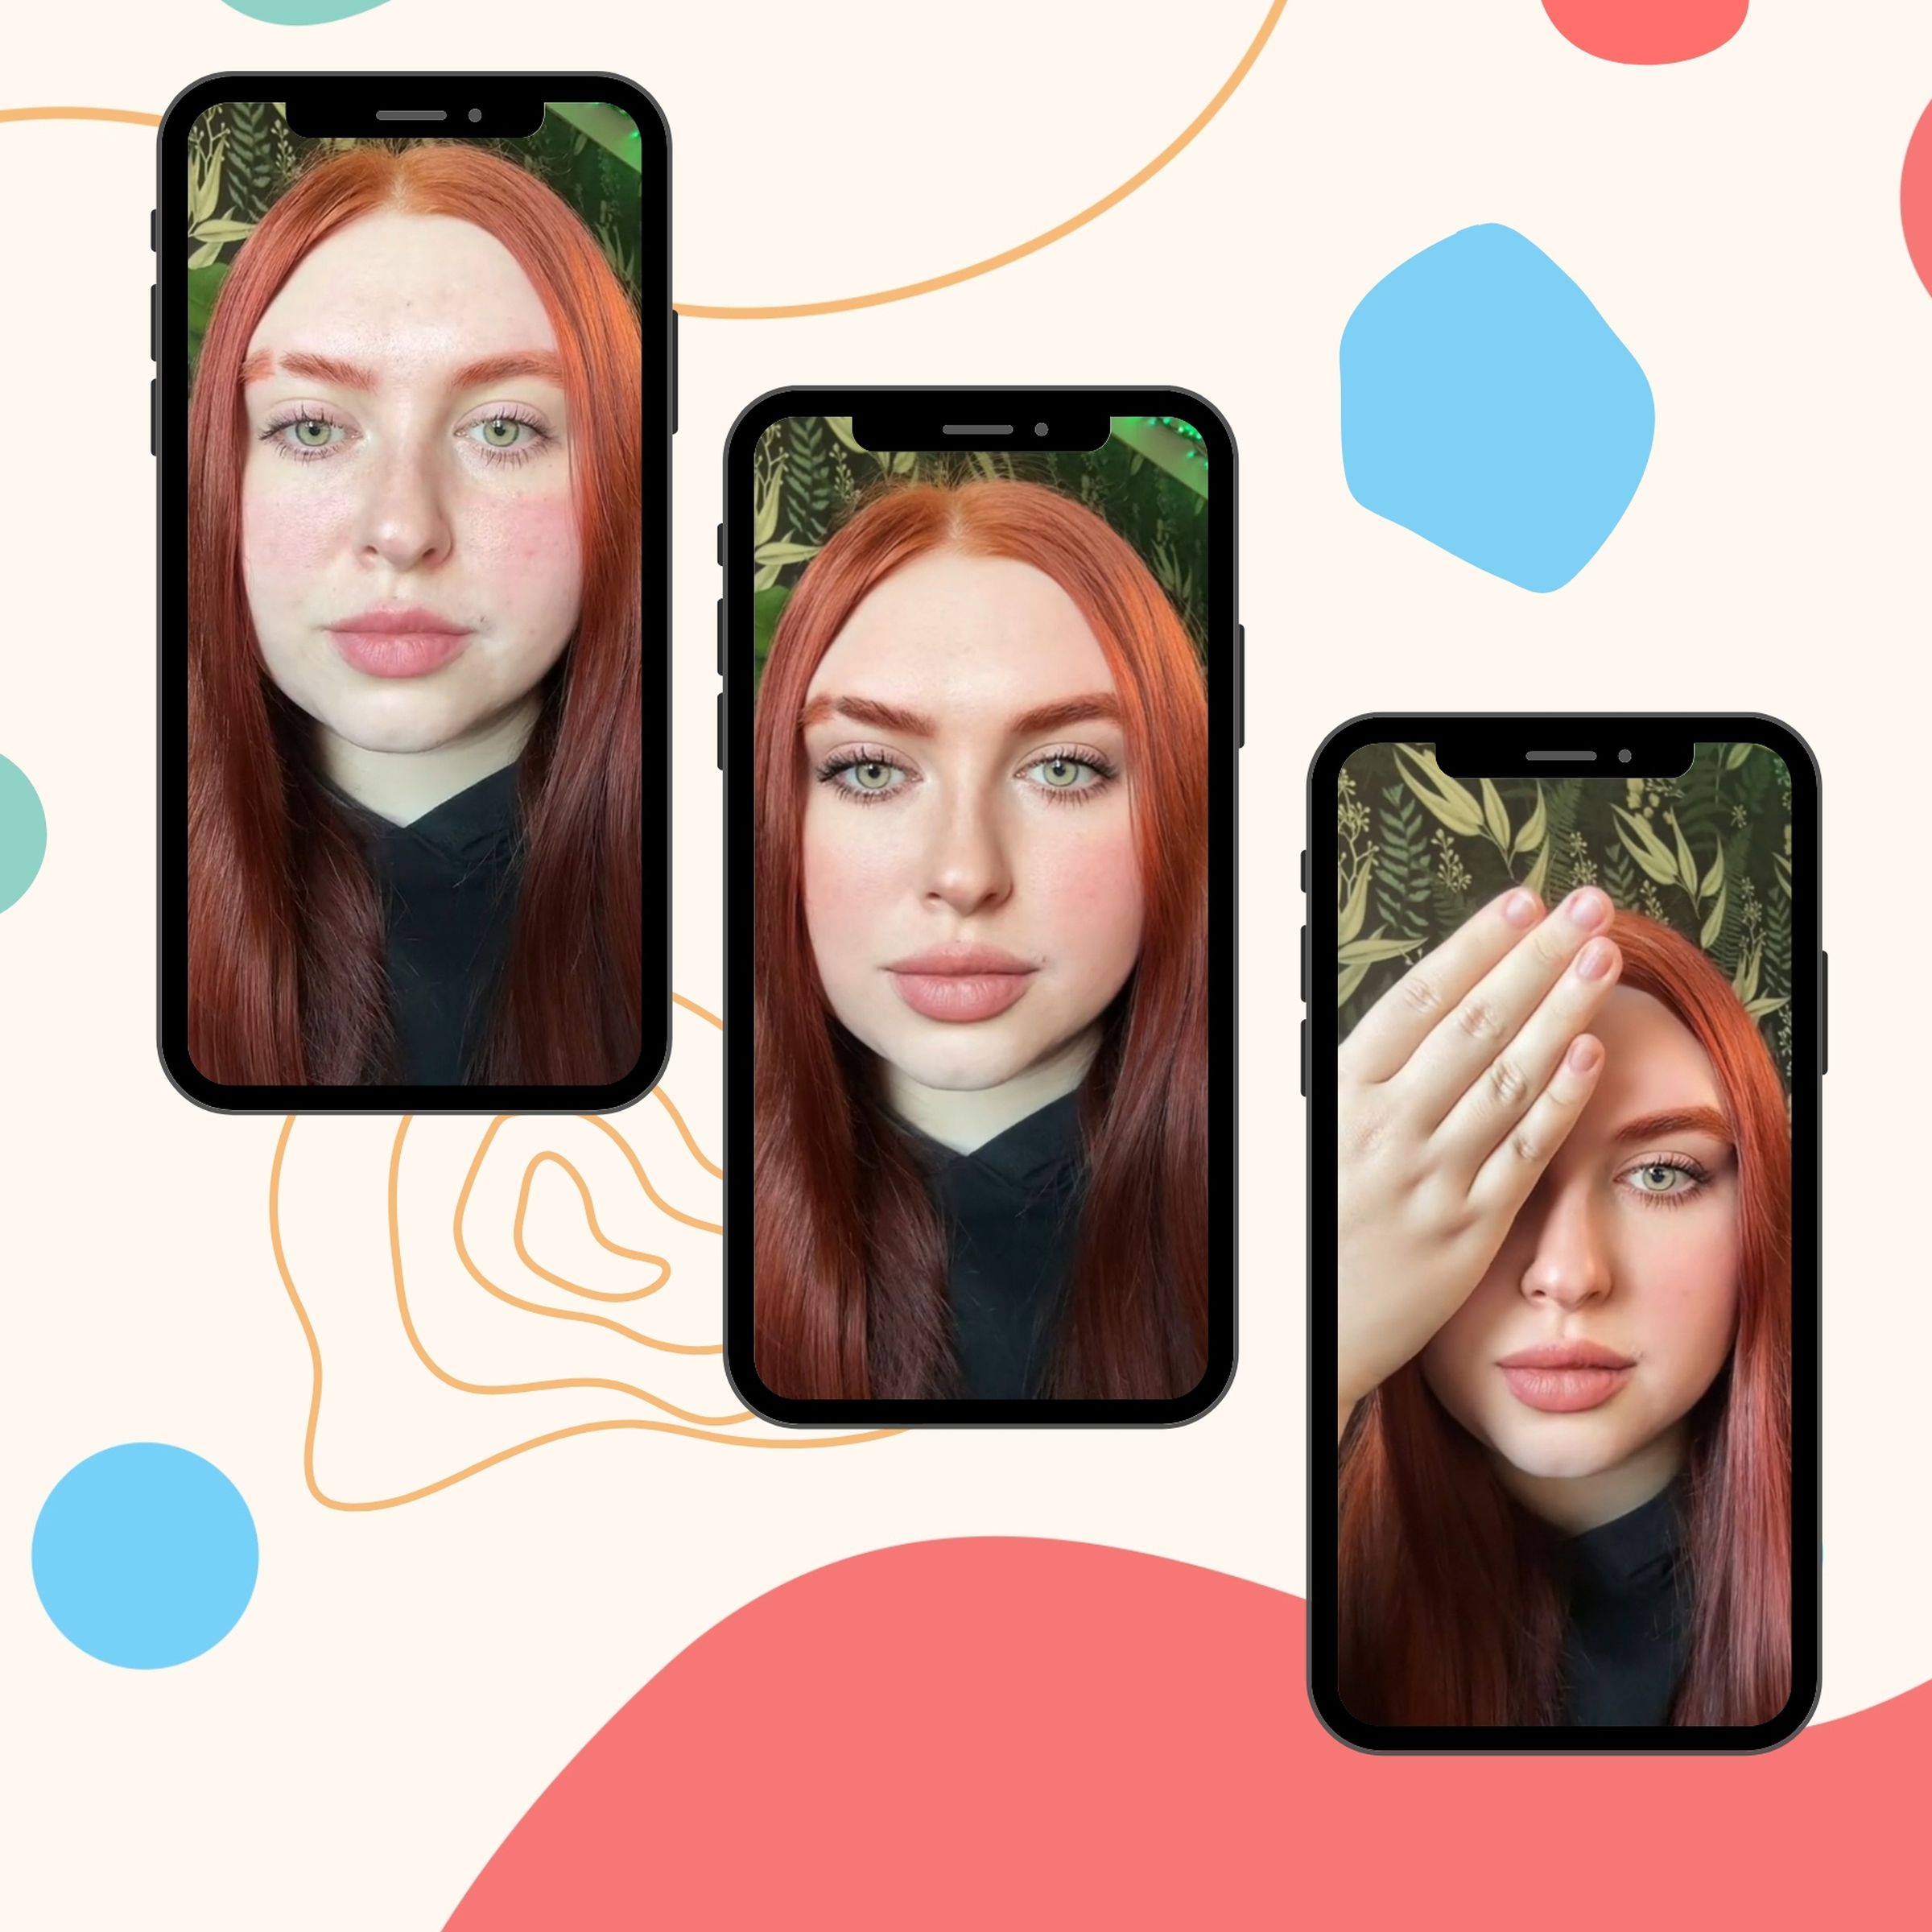 Three mobile phones against a colorful backdrop. The phones all display the same woman, the first without any filter, the second with TikTok’s Bold Glamour filter, and the third with a hand obscuring the filter.